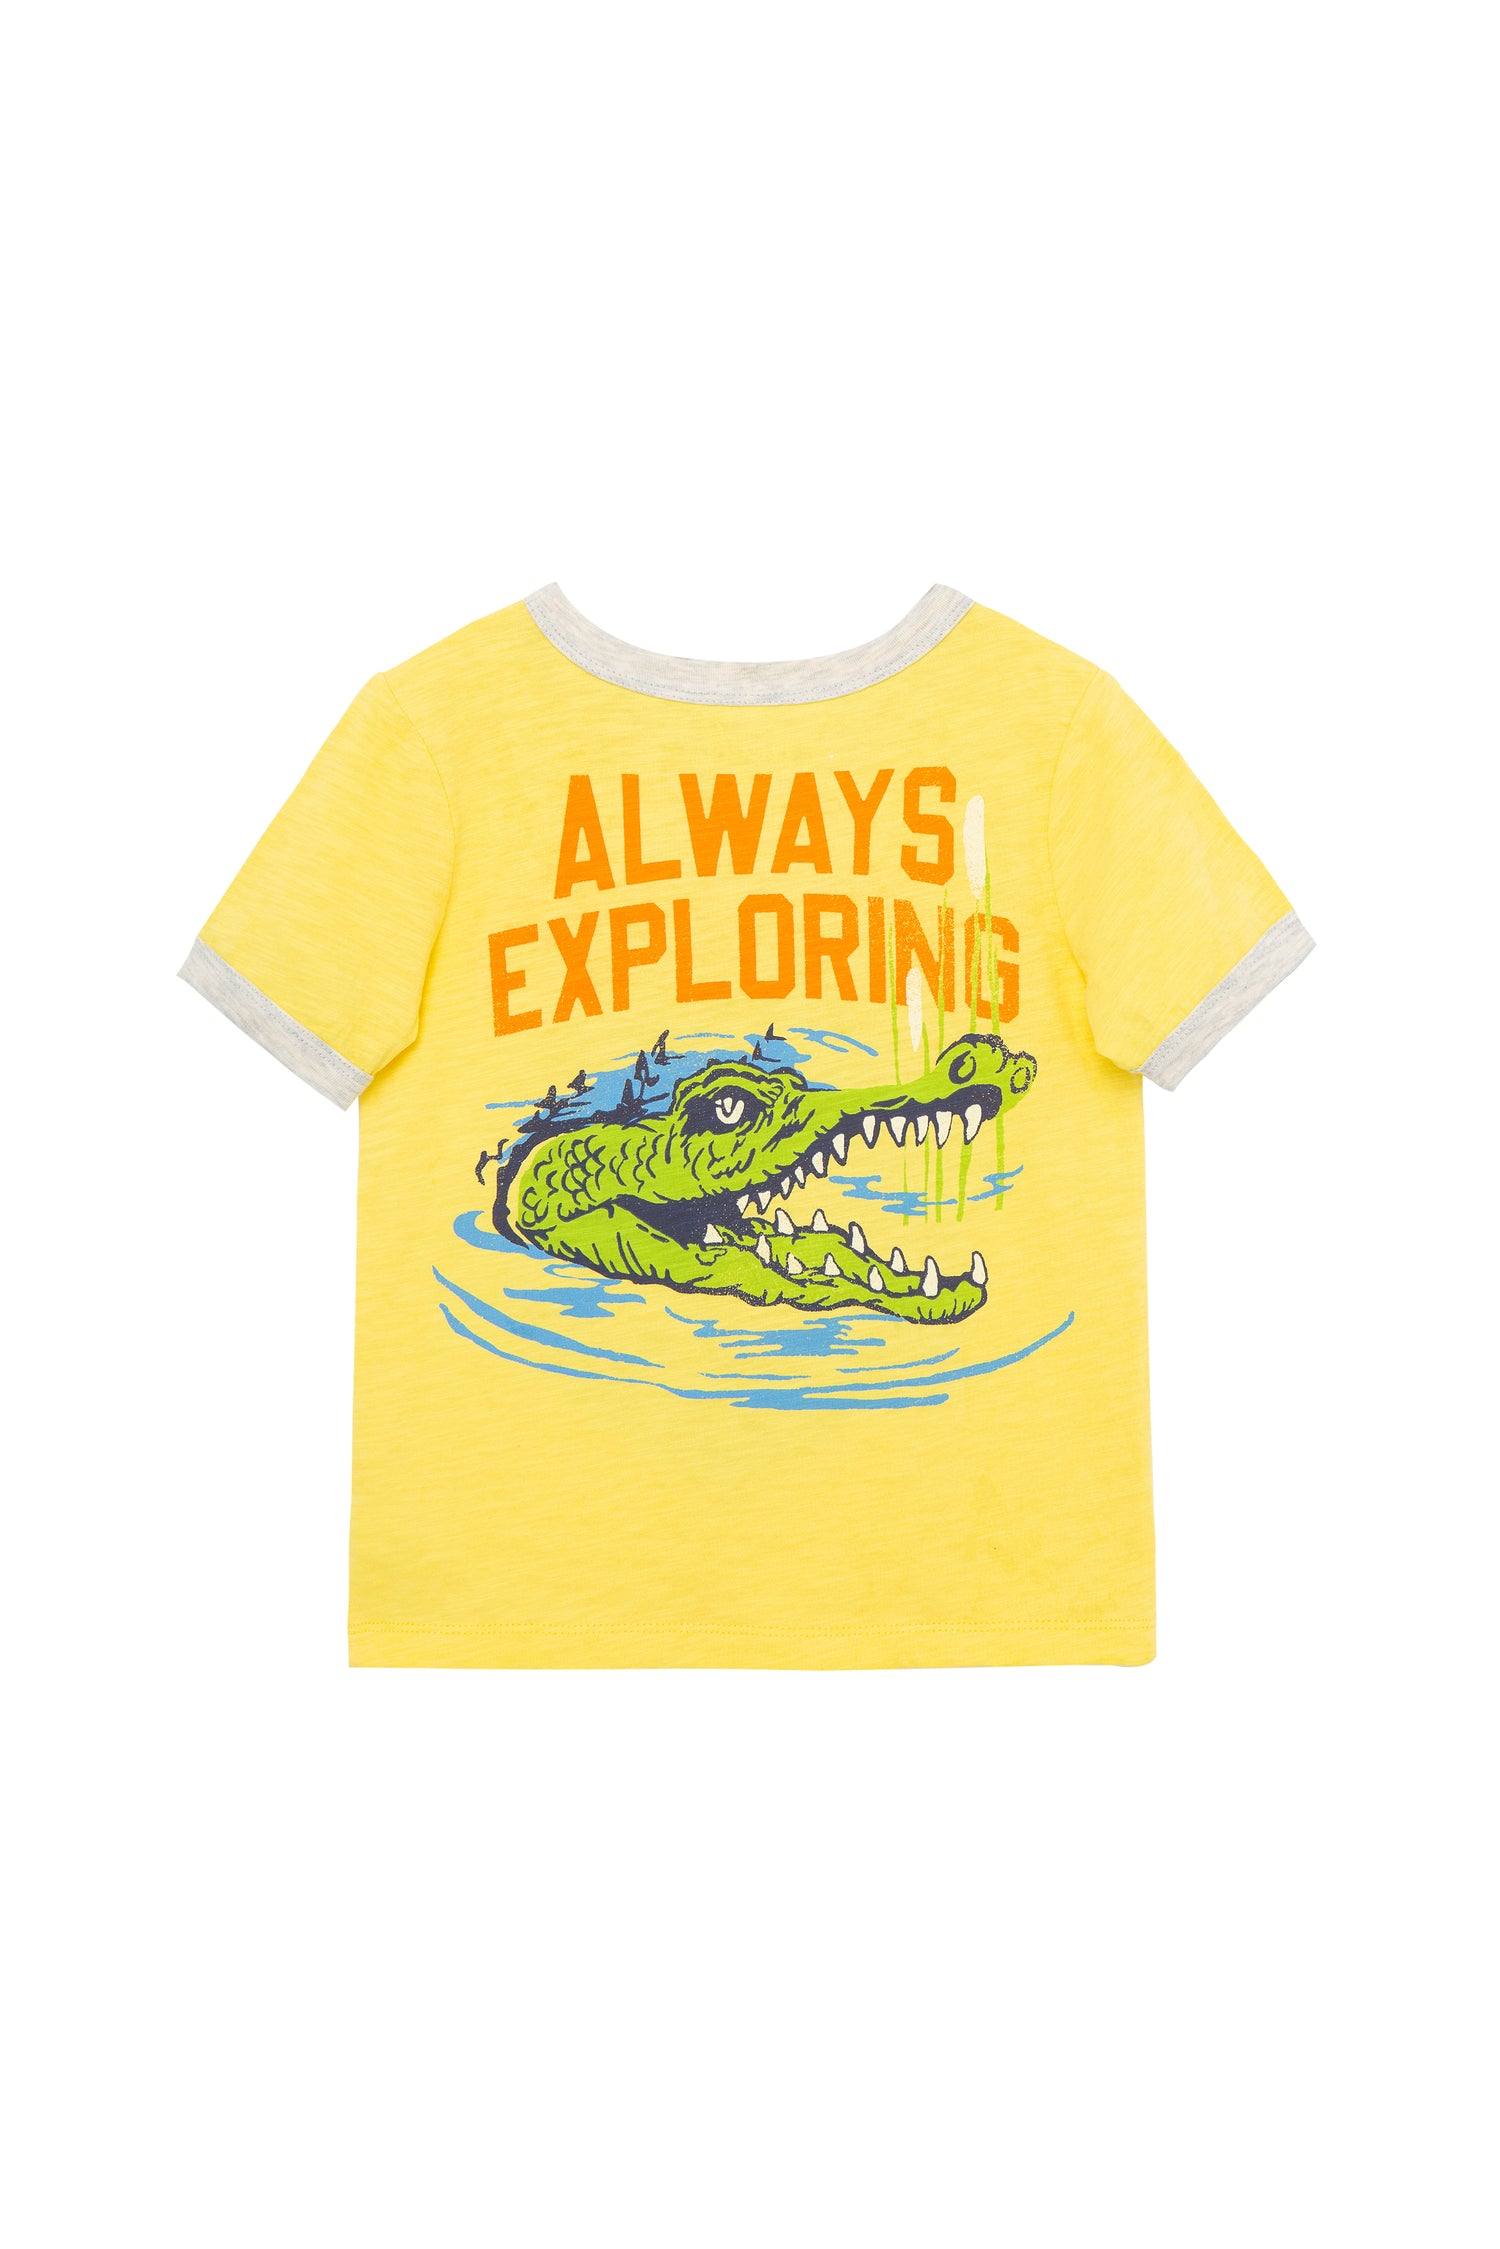 BACK OF YELLOW T-SHIRT WITH "ALWAYS EXPLORING"